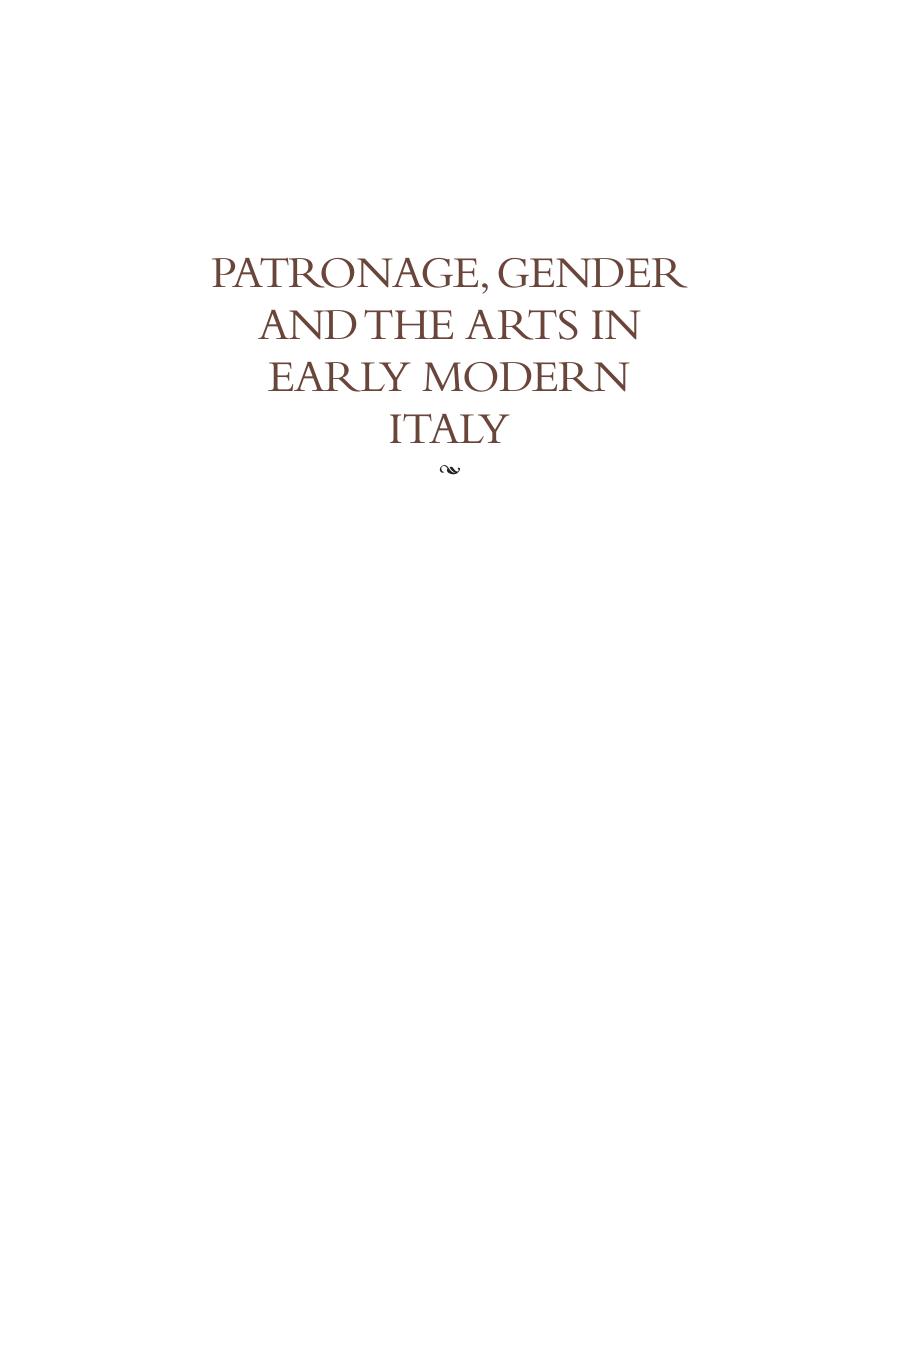 Patronage, Gender and the Arts in Early Modern Italy: Essays in Honor of Carolyn Valone by Katherine A. McIver; Cynthia Stollhans; Katherine A. McIver; Katherine A. McIver; Cynthia Stollhans